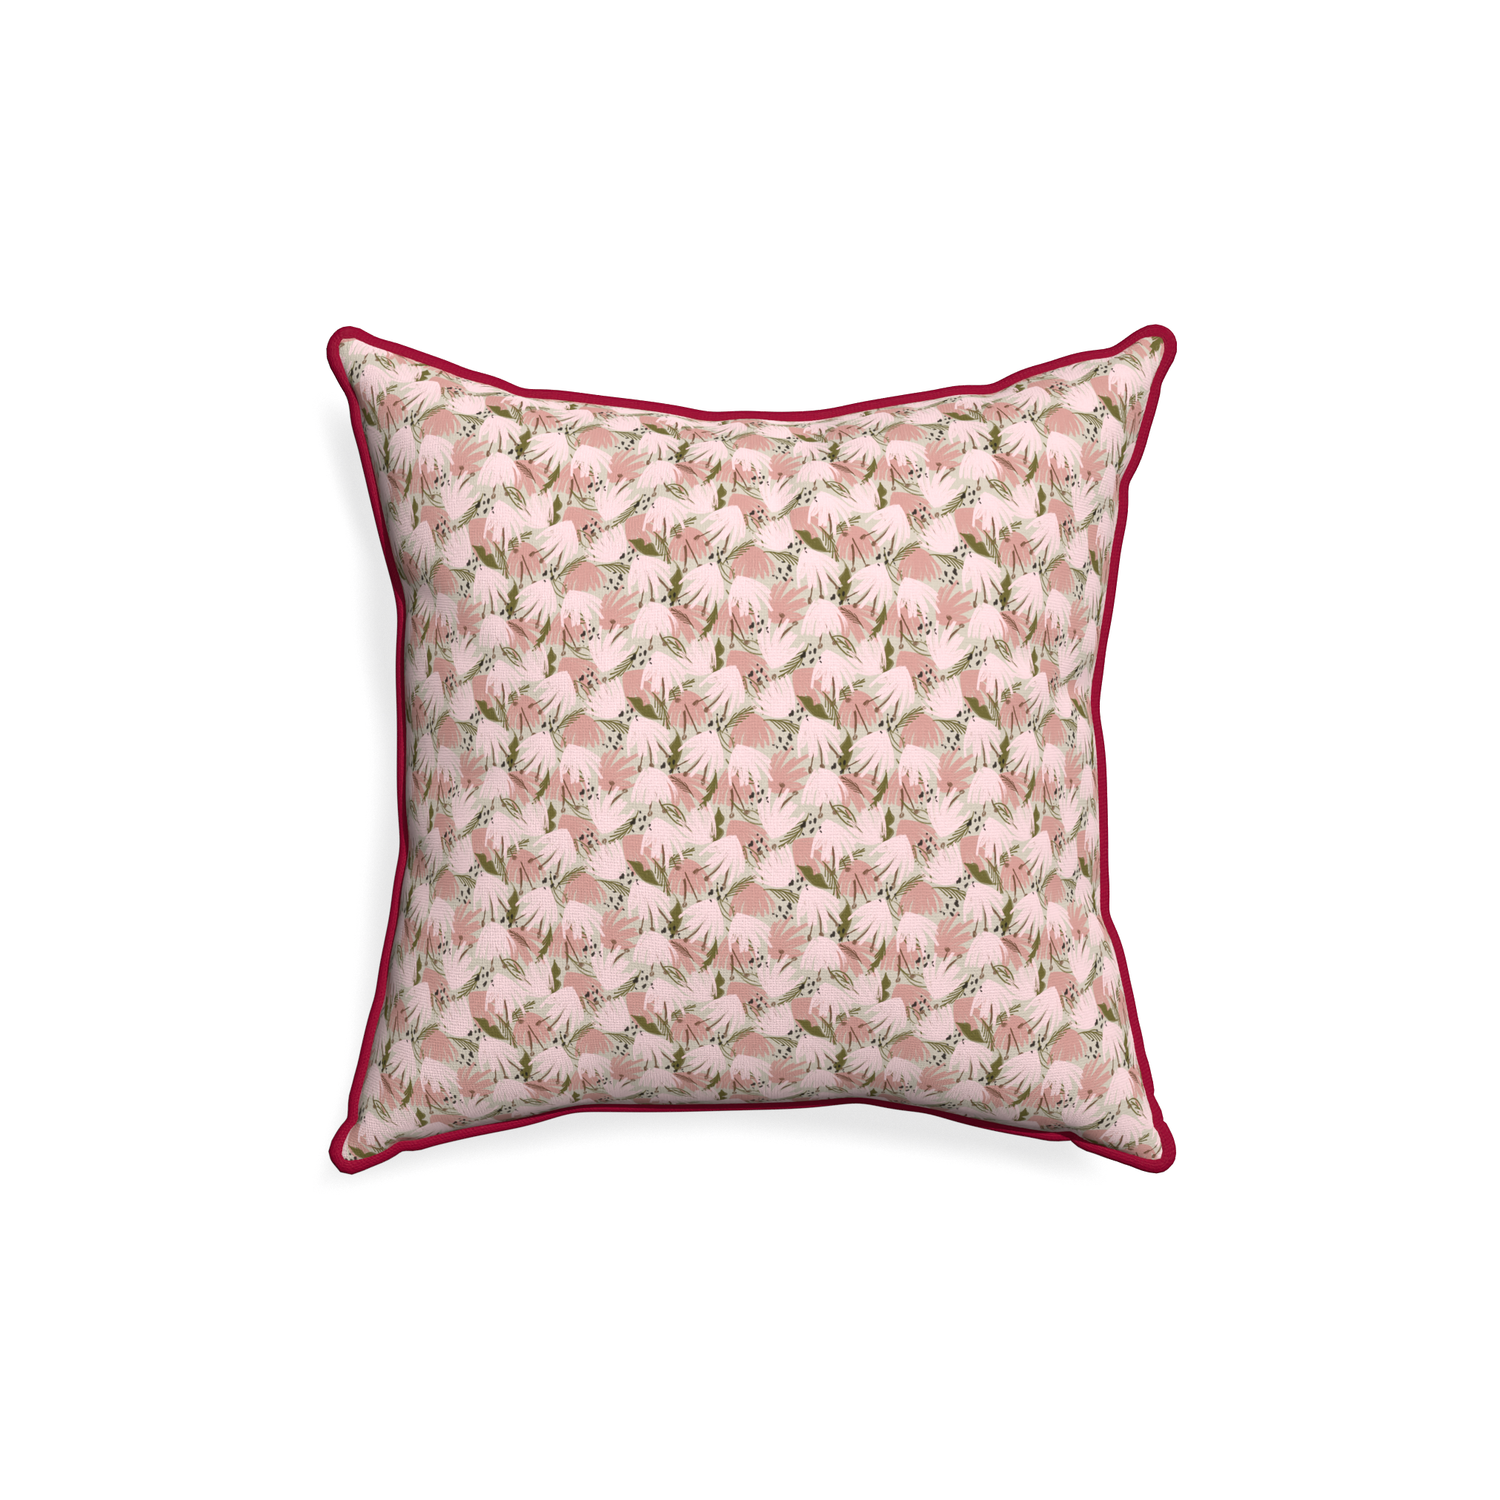 18-square eden pink custom pink floralpillow with raspberry piping on white background